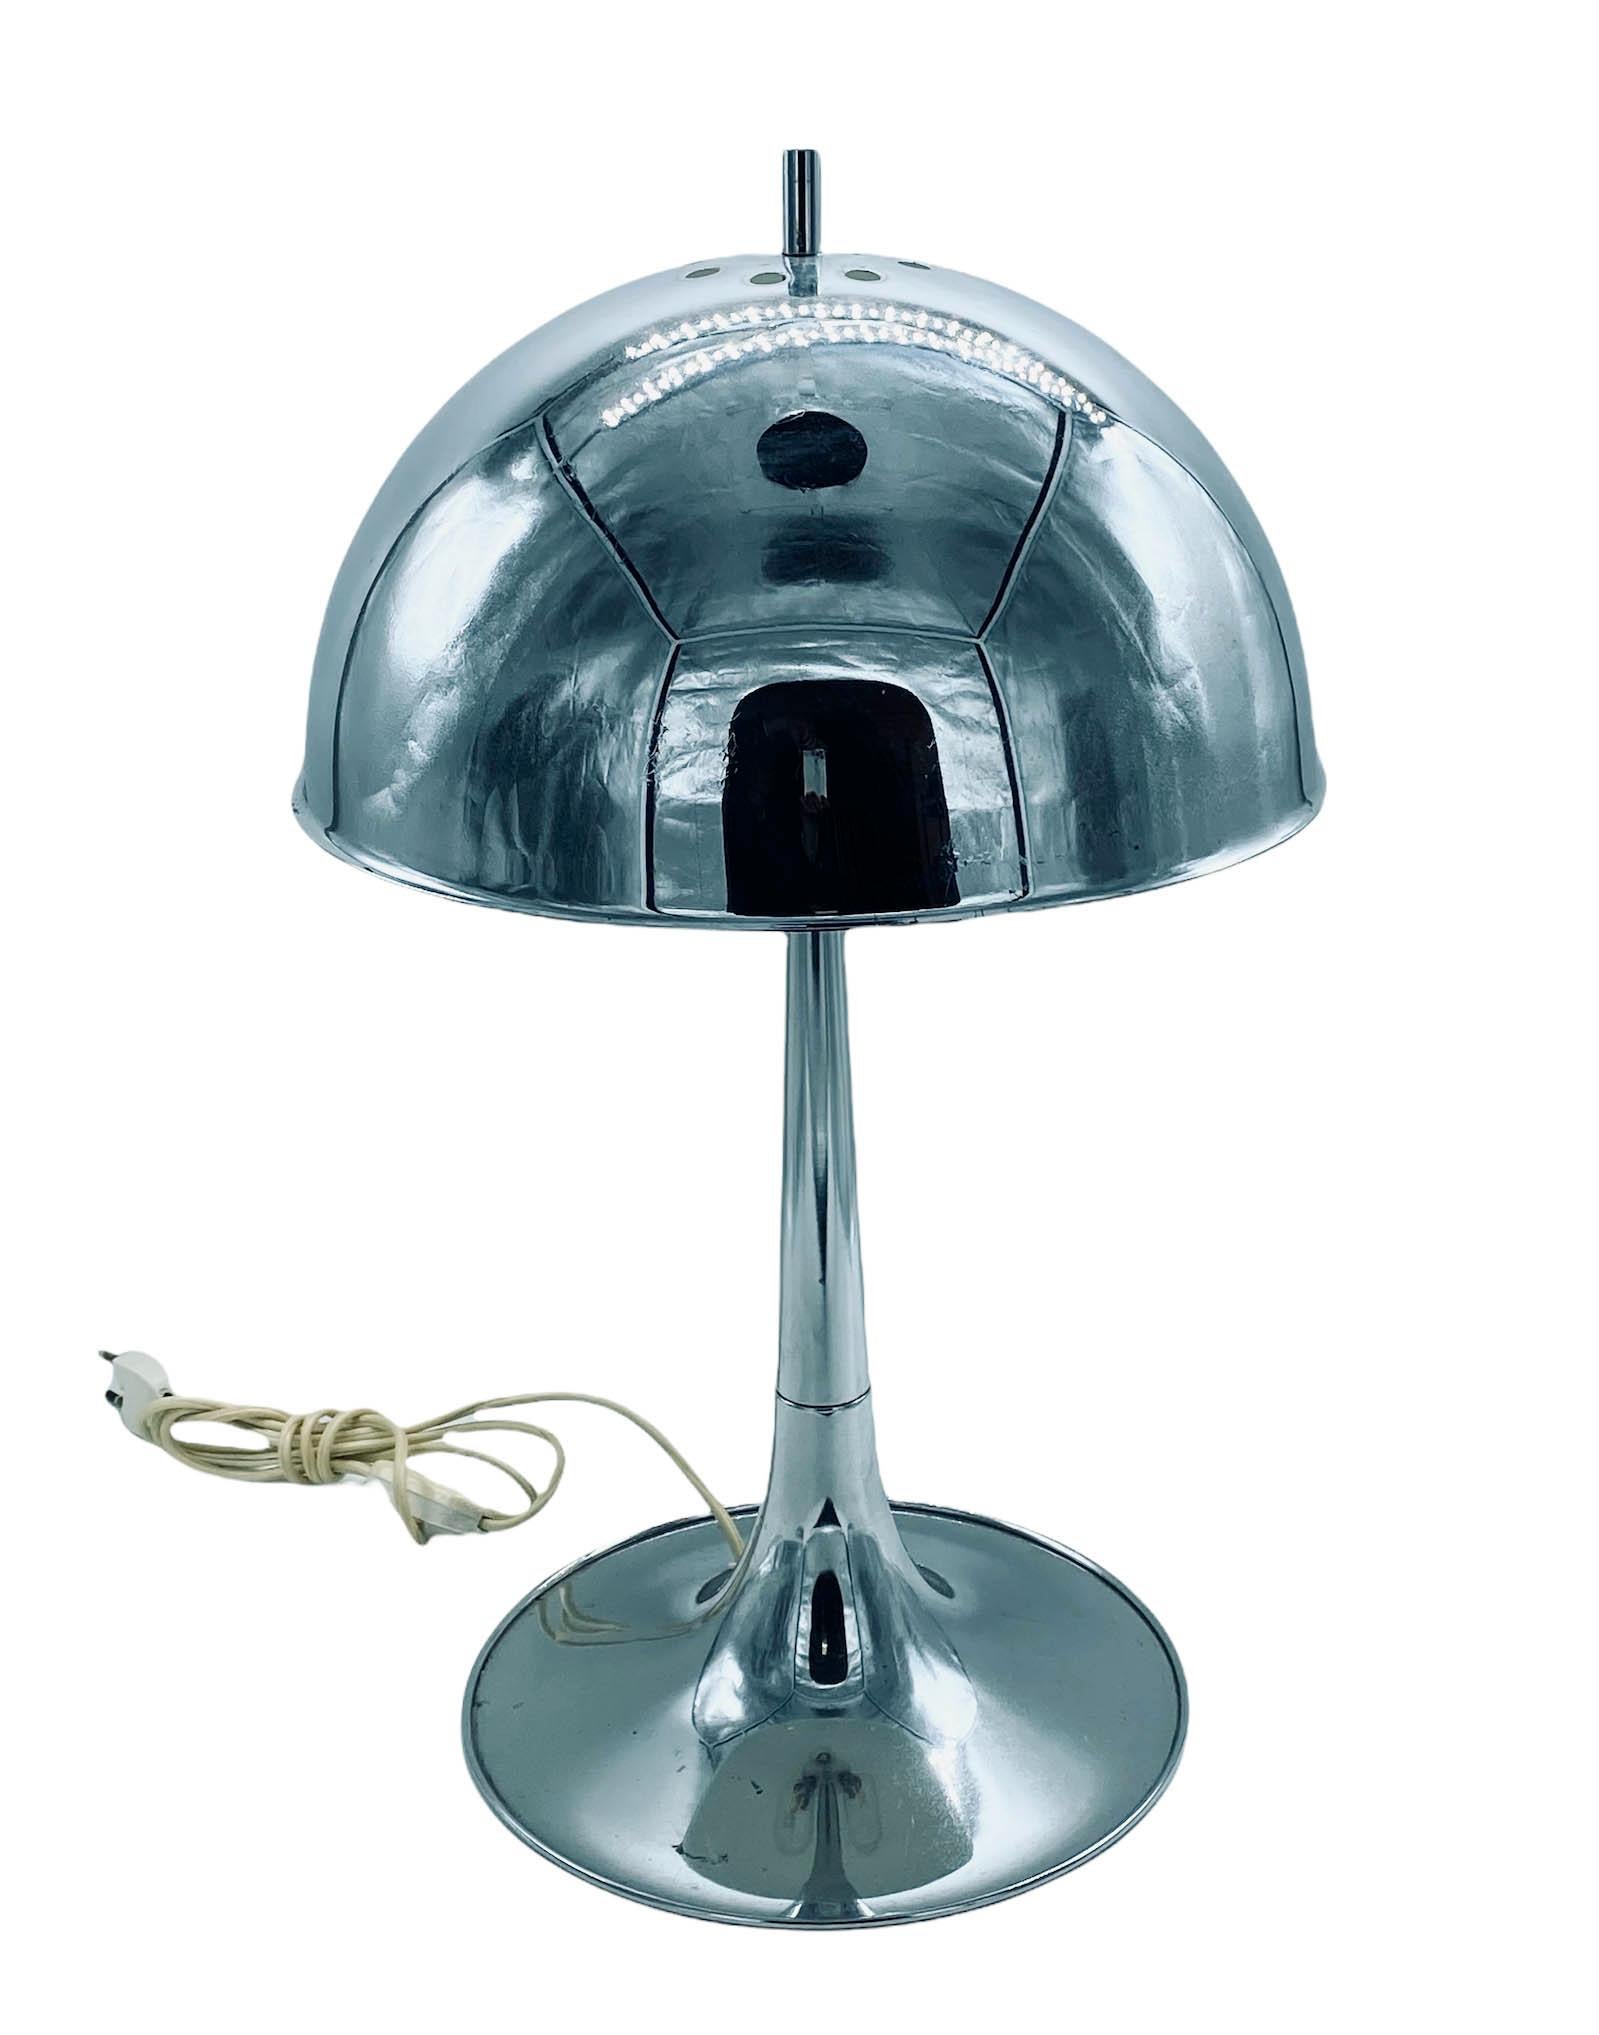 This table lamp was designed by Goffredo Reggiani for Reggiani, Italy, in the 1960s. It is a chrome-plated metal lamp with a mushroom-shaped shade and a trupet base. In original, good condition.